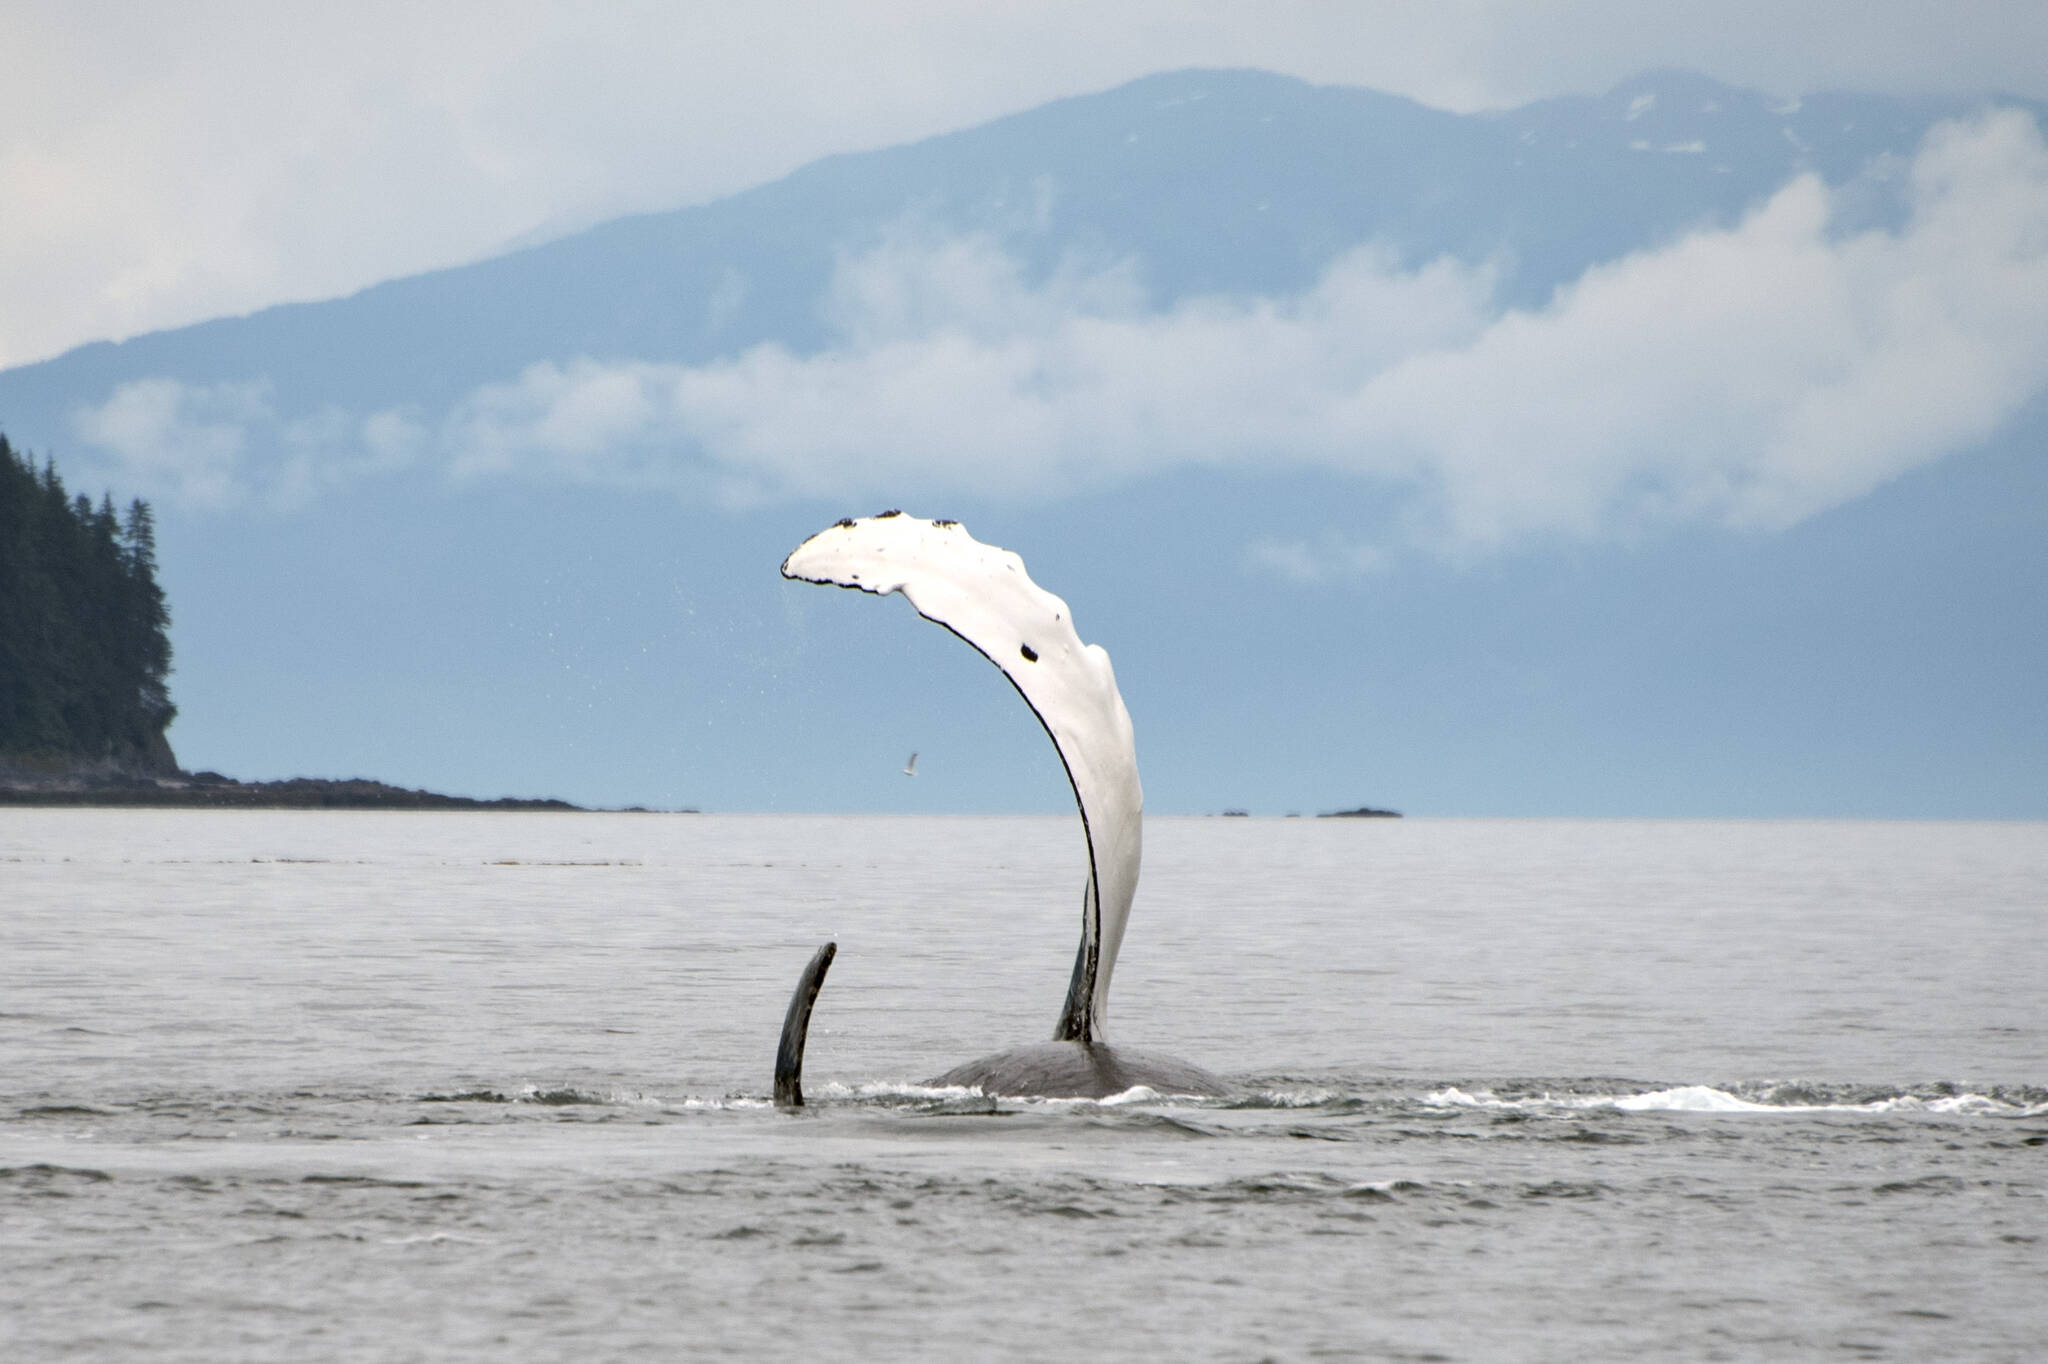 Humpback whales roll with pectoral fins above the water, just outside Tenakee Inlet. (Courtesy Photo / Kenneth Gill, gillfoto)